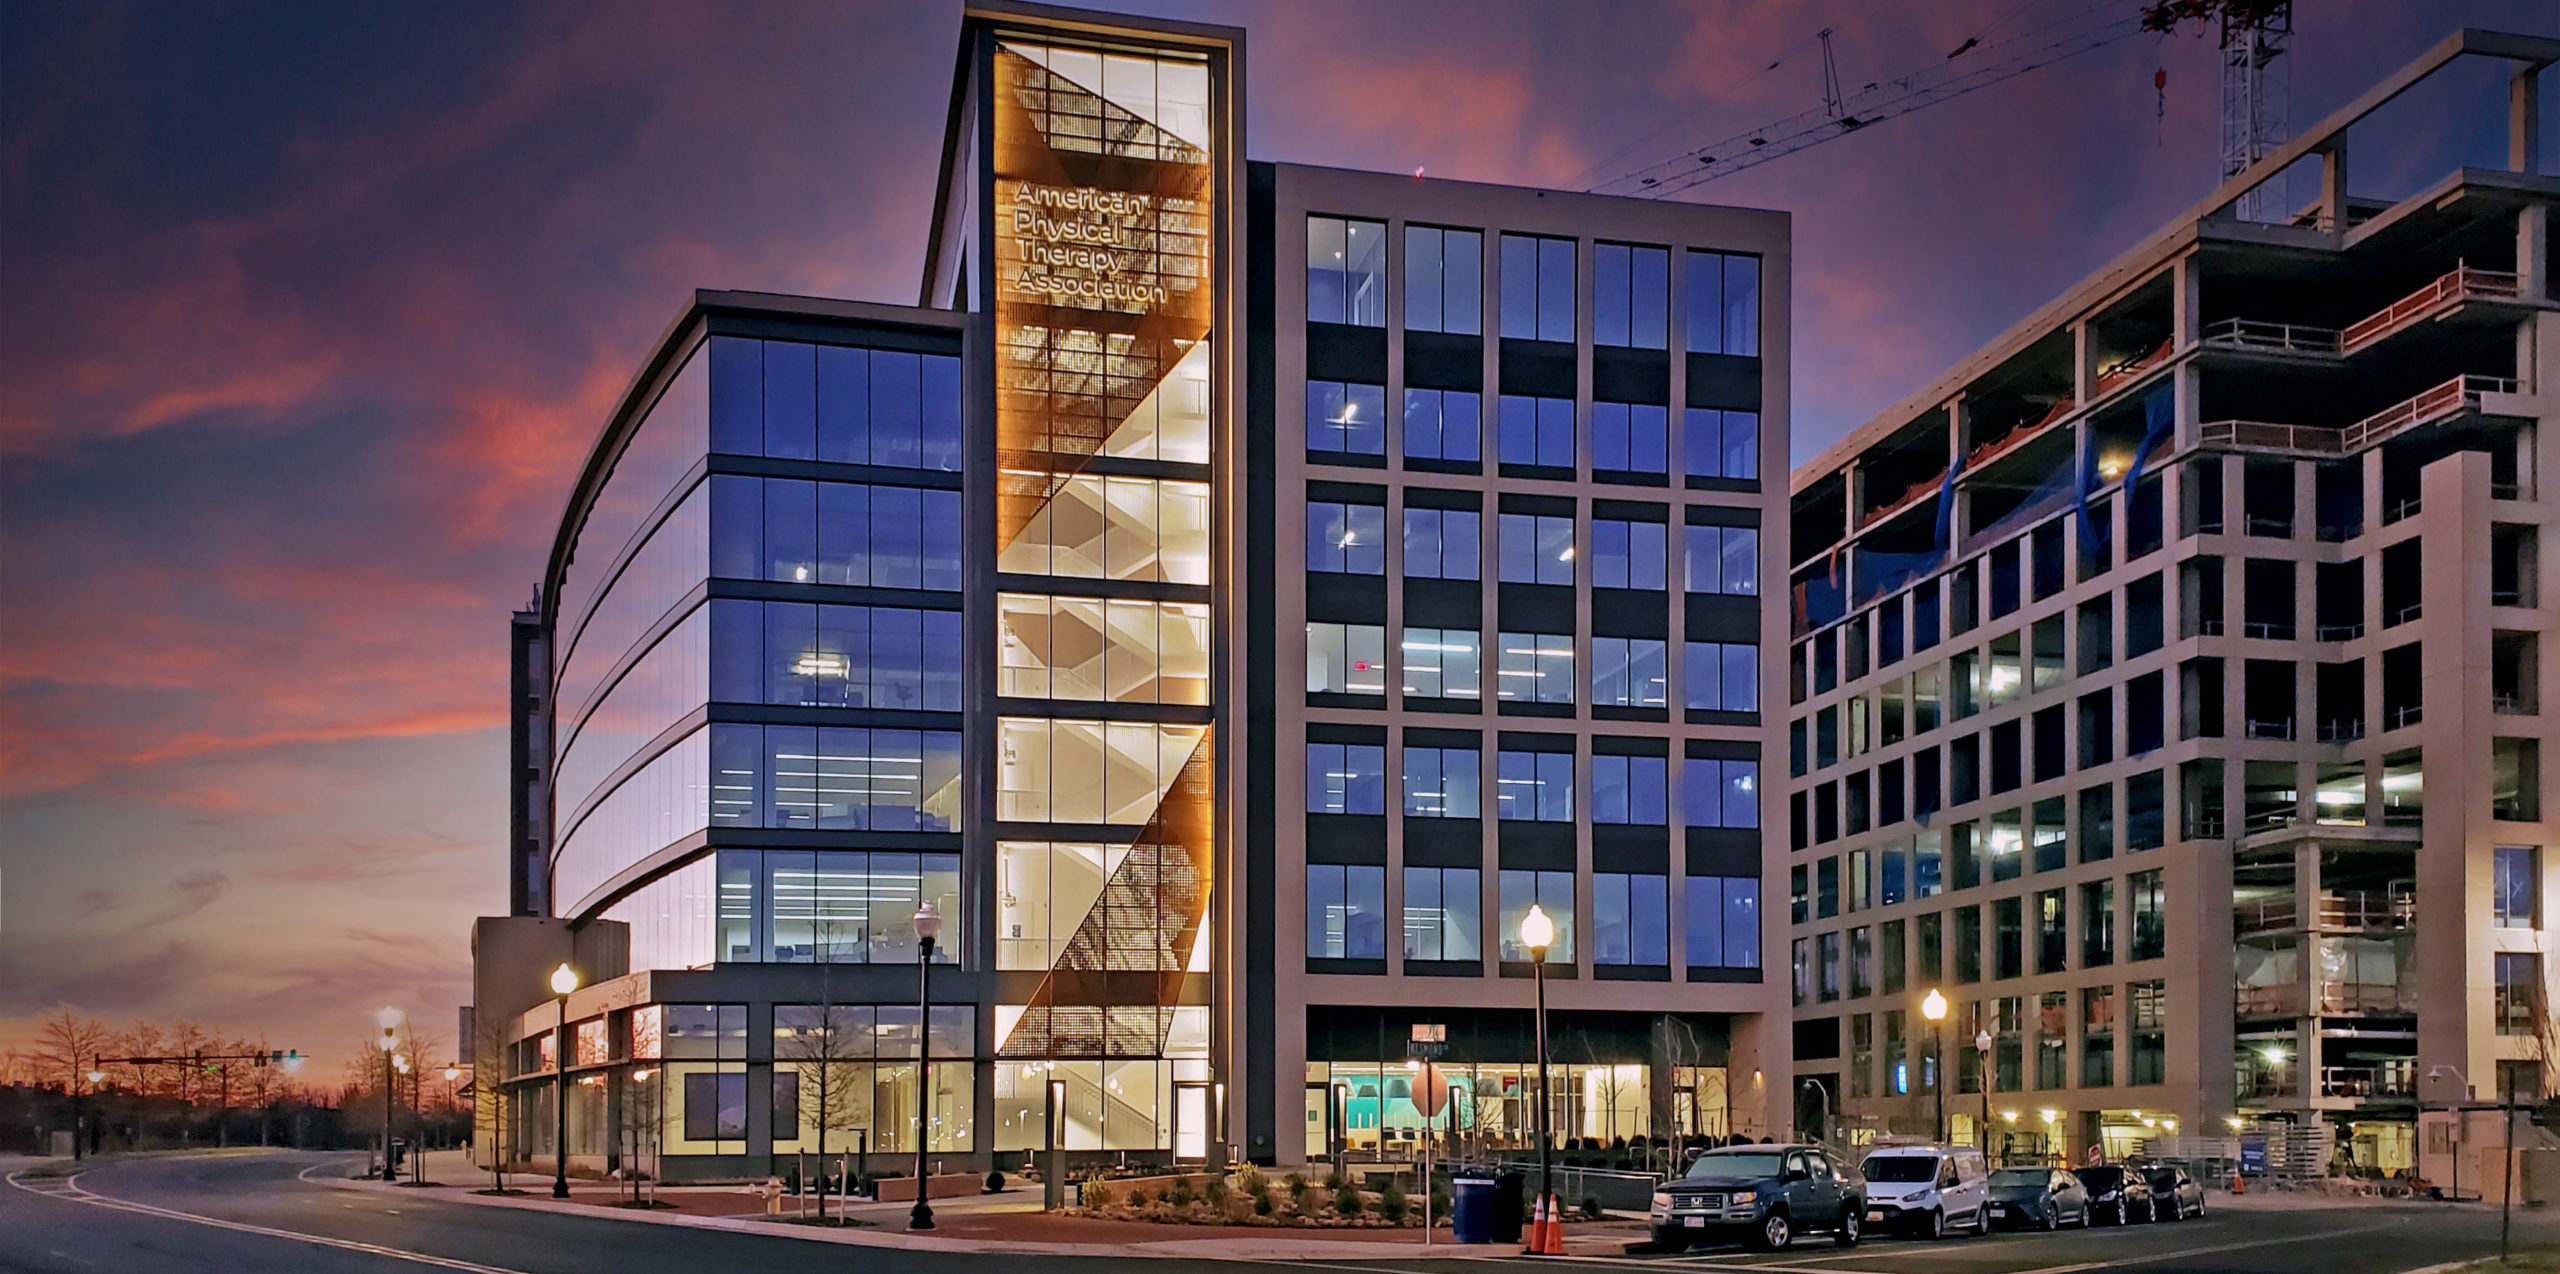 The new headquarters of the American Physical Therapy Association (APTA) at dusk. Synergi's custom design perforated metal guardrail can be seen at center